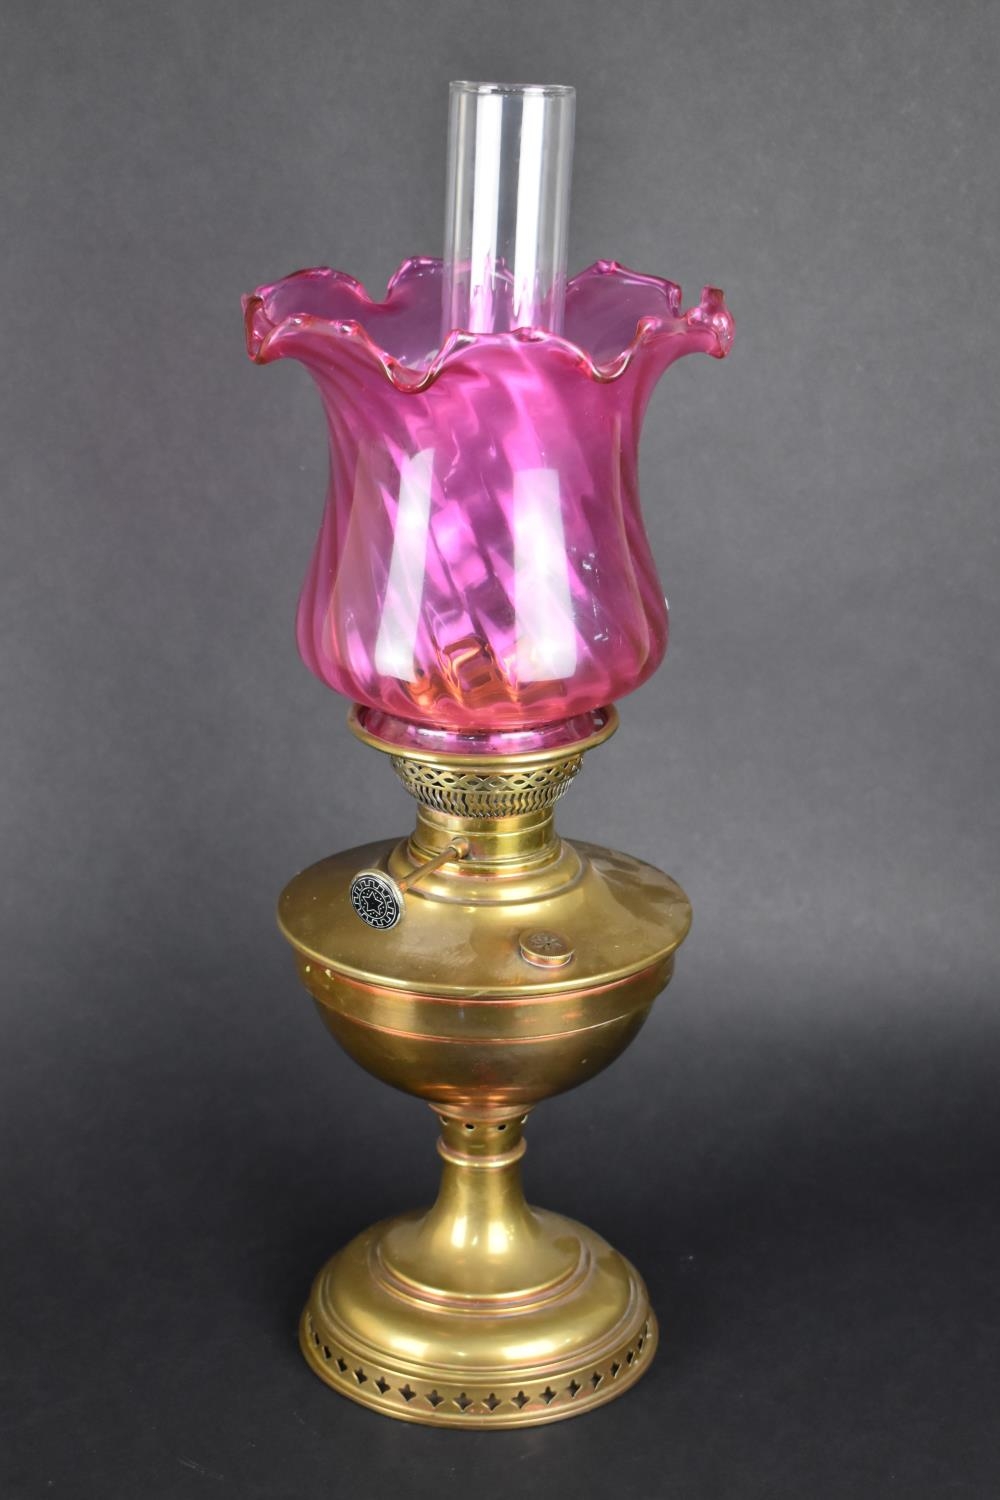 An Early 20th Century Brass Oil Lamp with Cranberry Glass Shade and Plain Glass Chimney, 57cms High - Image 2 of 2